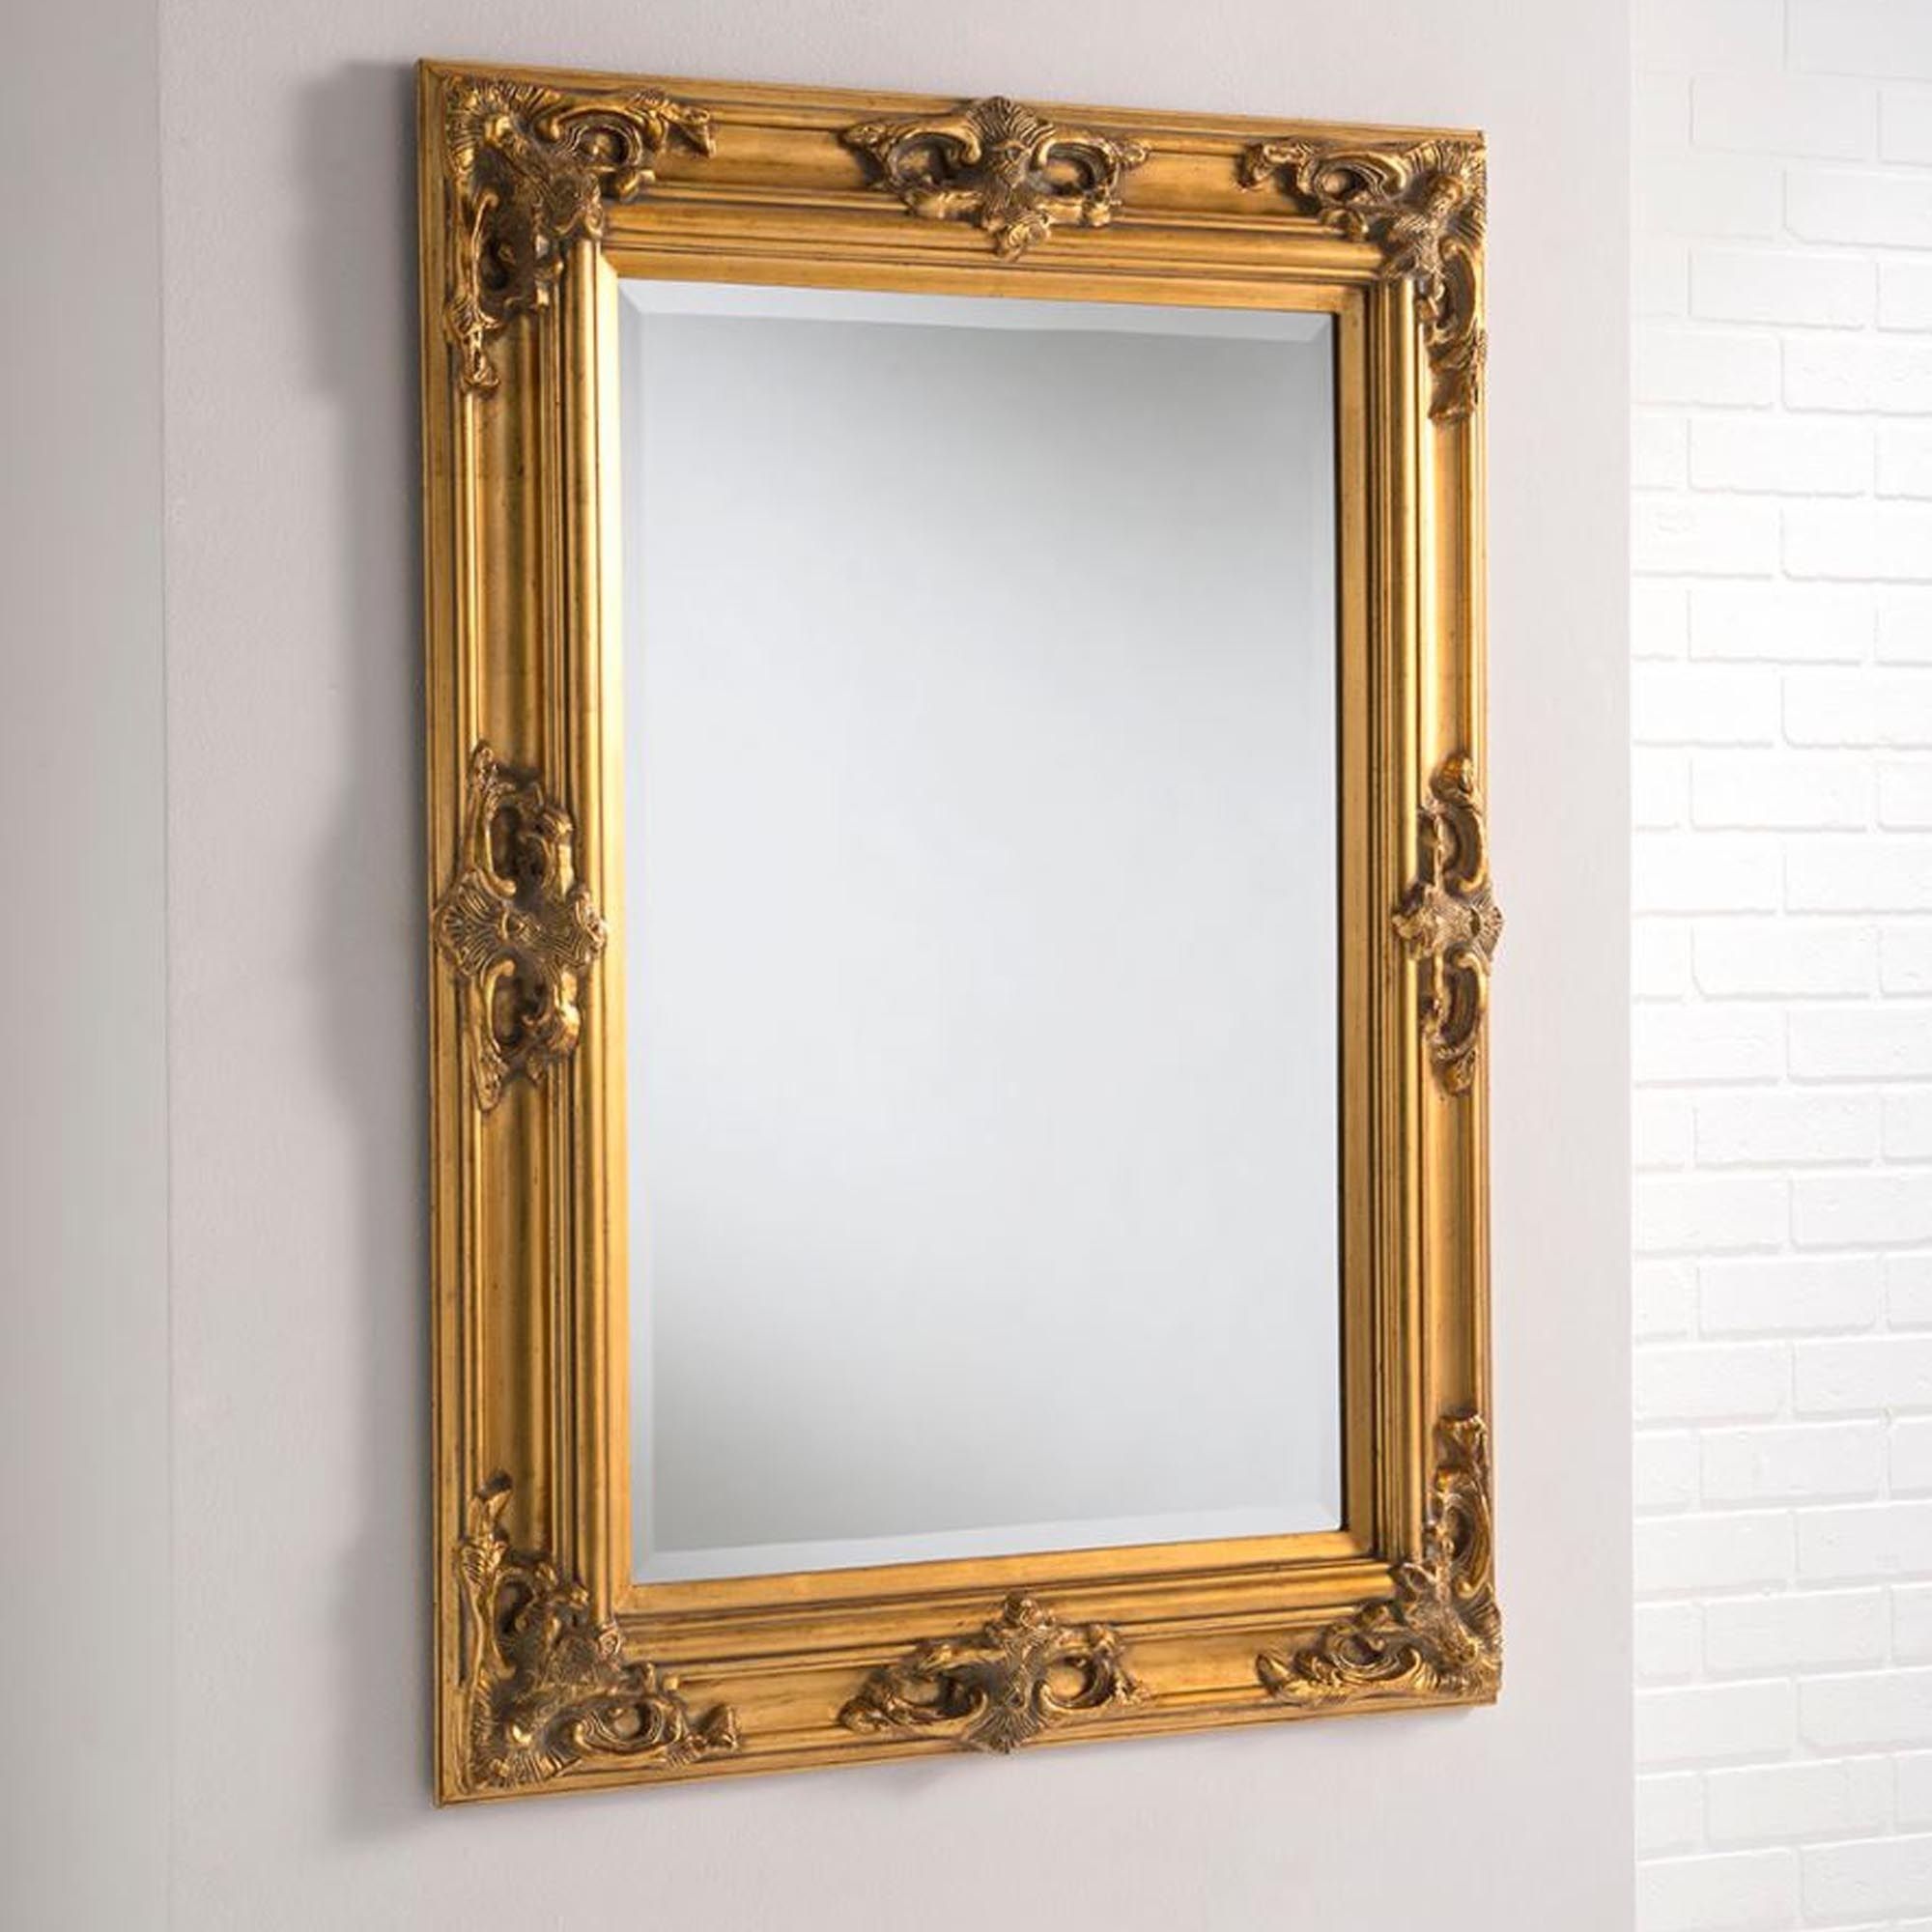 Tuscany Antique French Style Gold Wall Mirror | Homesdirect365 Inside Antiqued Glass Wall Mirrors (Photo 1 of 15)